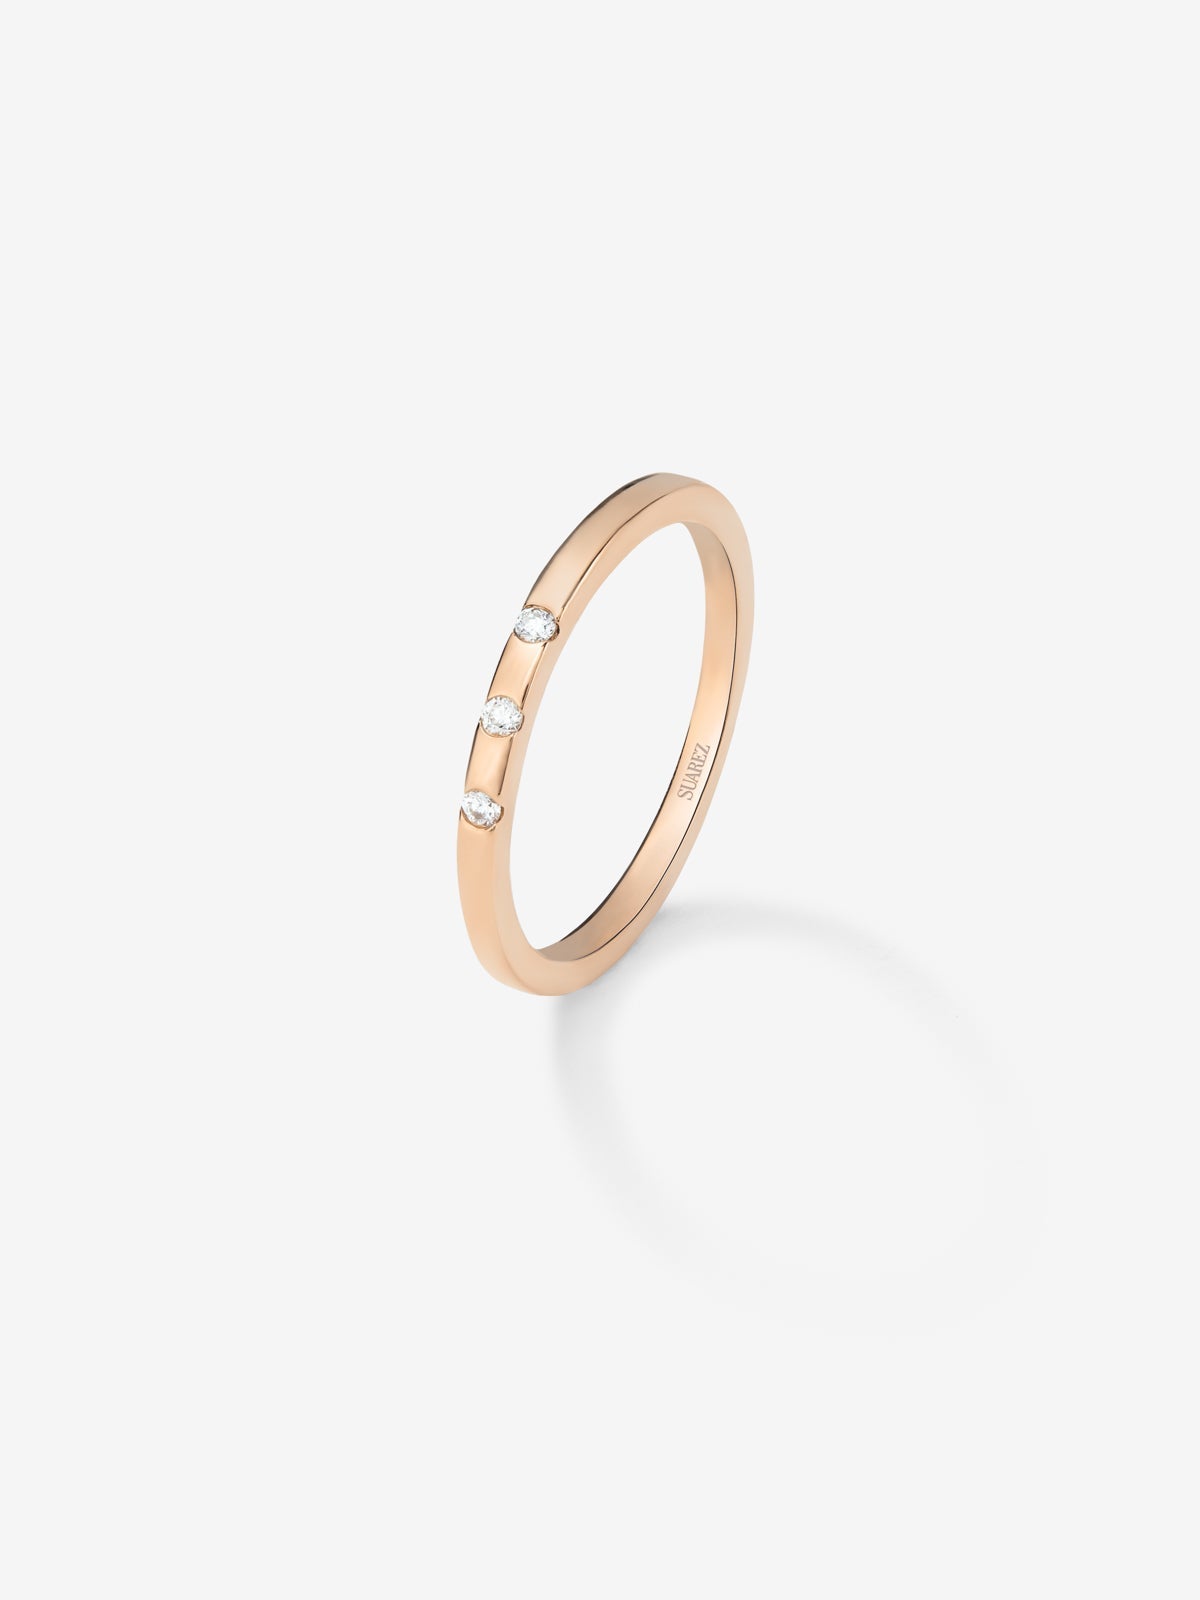 18K rose gold thin band ring with diamonds